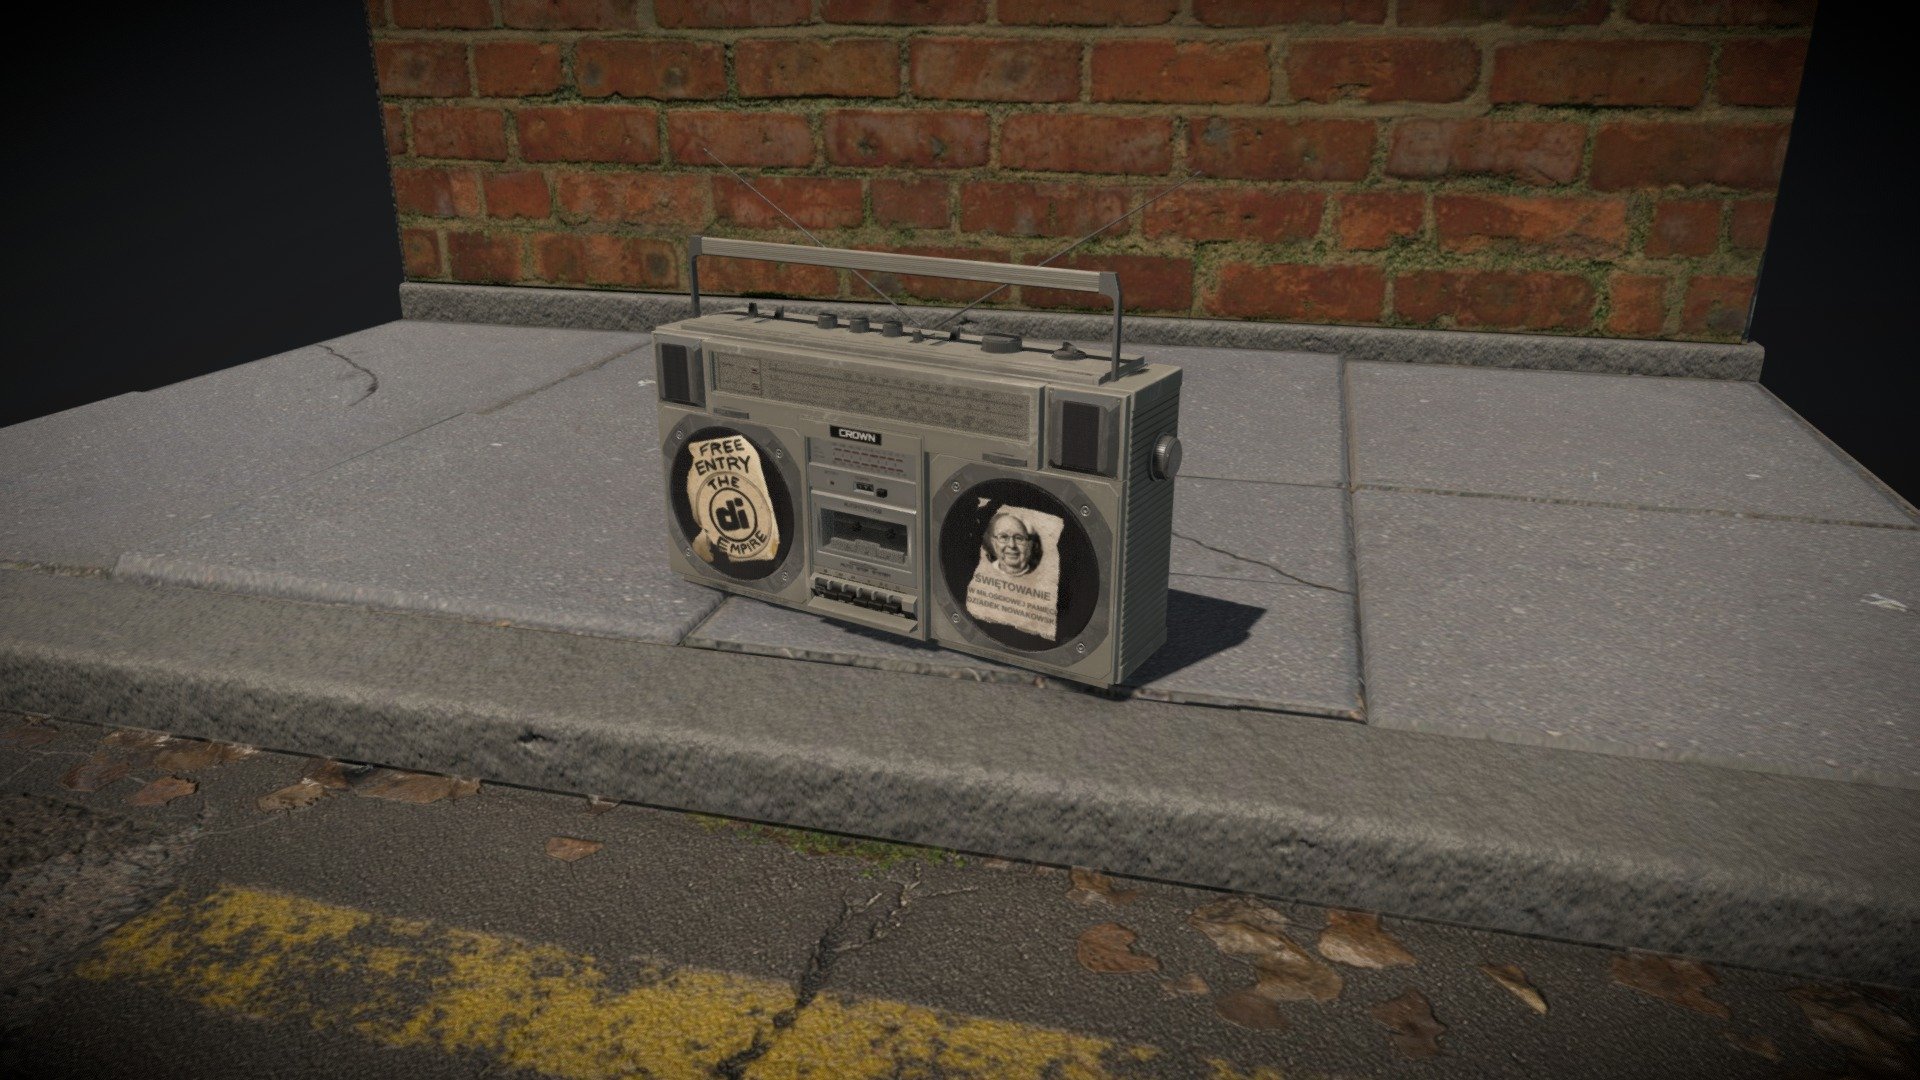 A retro boombox created for the #Retroelectronicschallenge and a bit of fun. Based on the Crown CSC 950 although not an exact replica 3d model